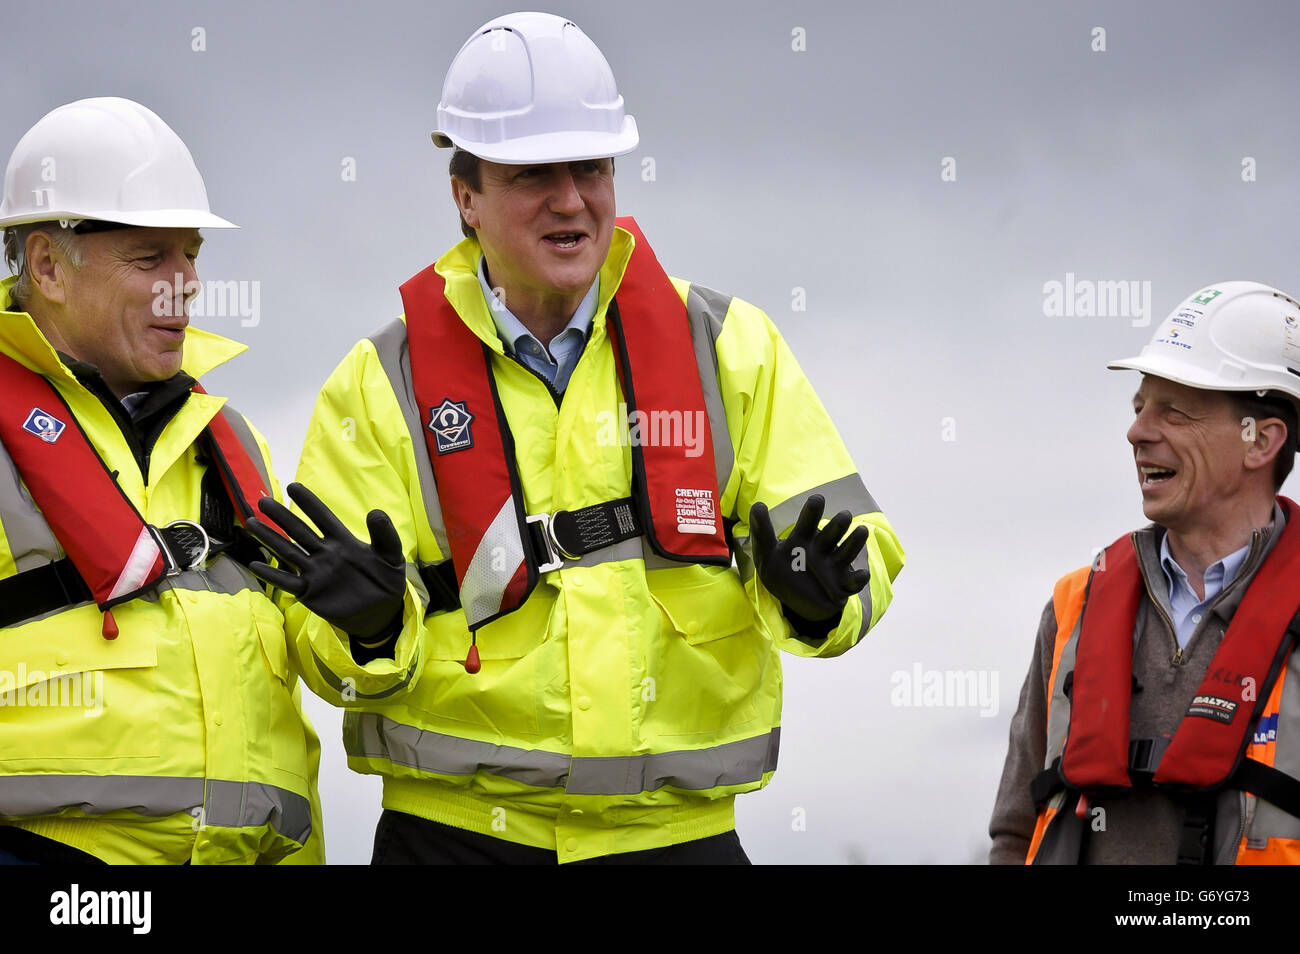 Prime Minister David Cameron (centre) wears full PPE including steel toe-capped boots, high-viz vest, life-jacket, gloves and hard-hat as he arrives on site at the dredging works on the River Parrett, near Burrowbridge, Somerset, where repair and recovery from the floods earlier in 2014 are taking place. Stock Photo